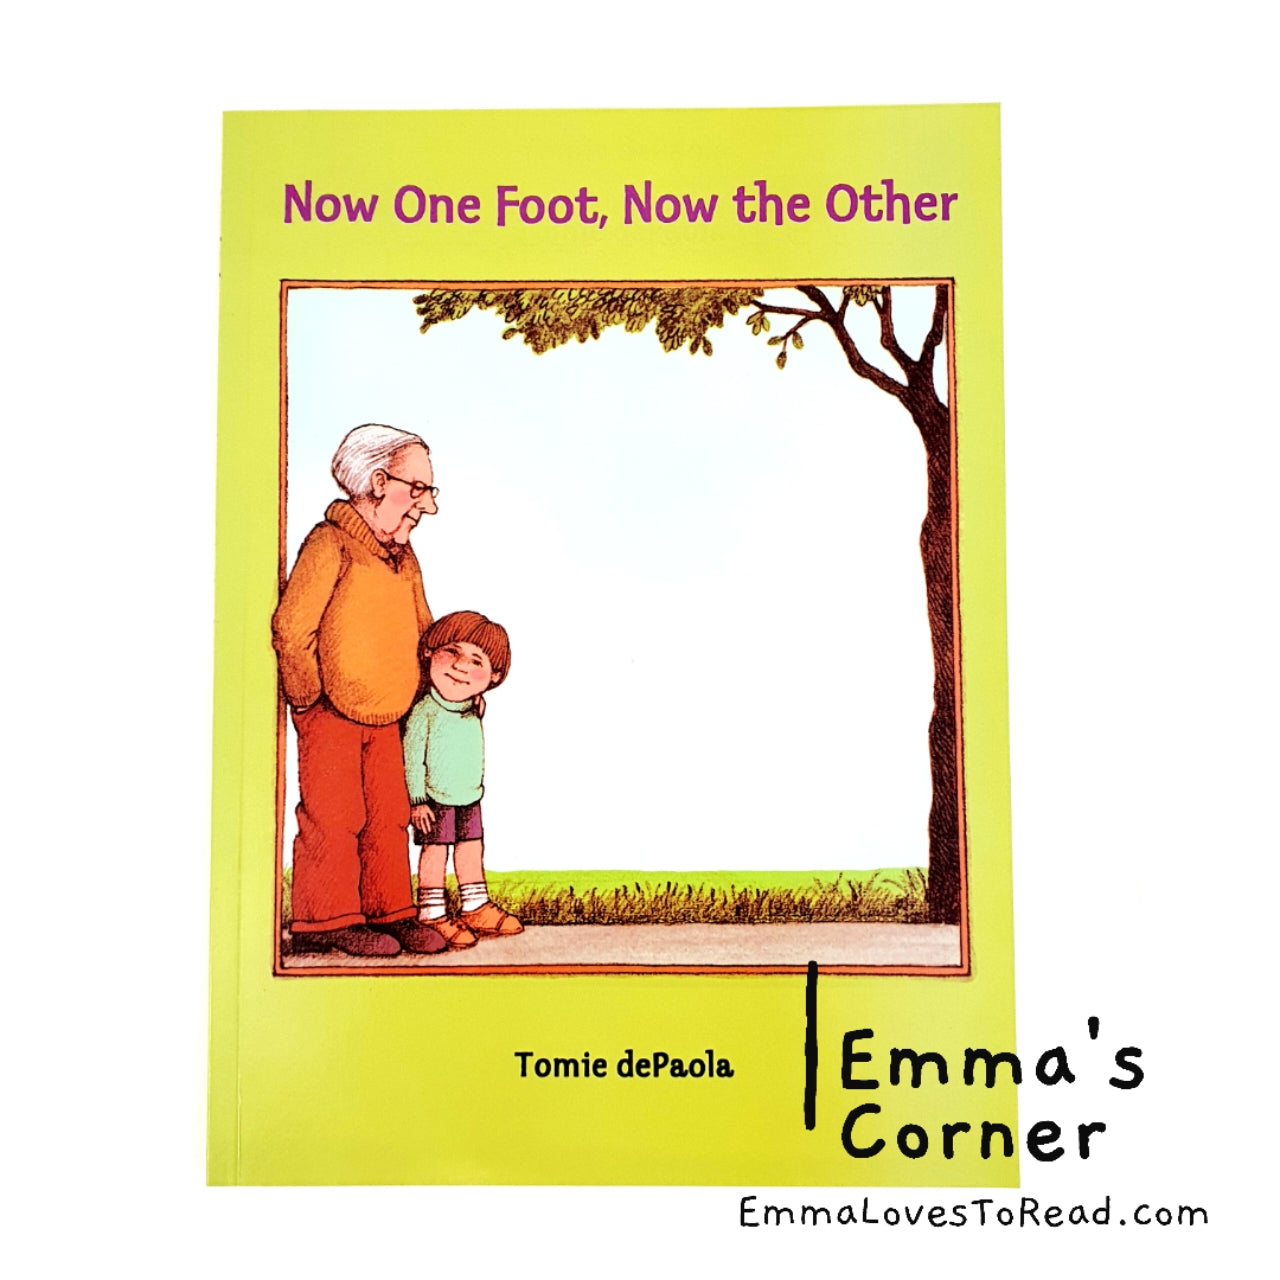 Now One Foot, Now the Other by Tomie dePaola PB